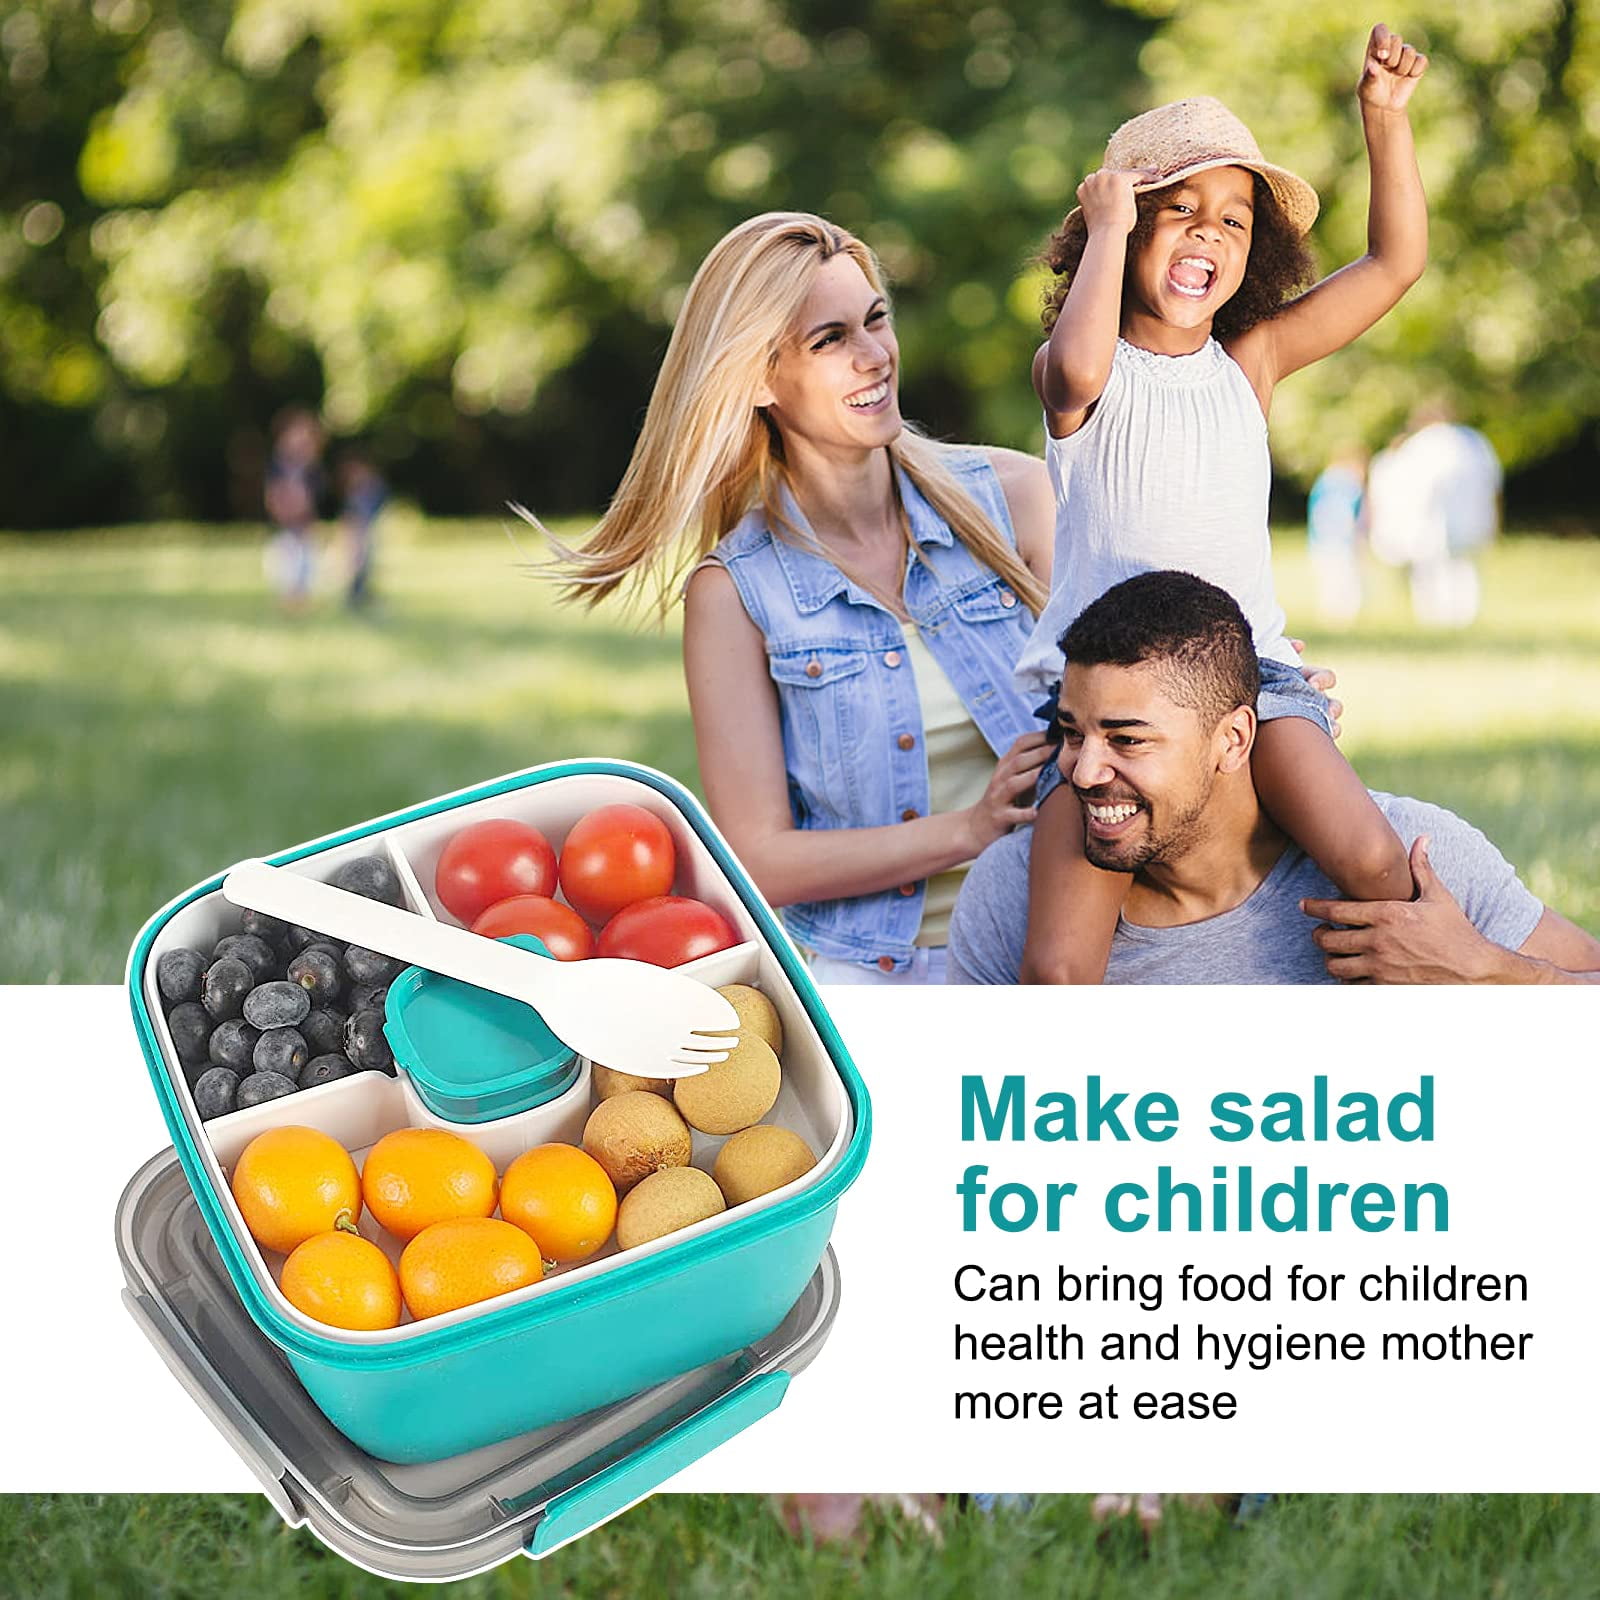 Freshmage Salad Lunch Container To Go, 52-oz Salad Bowls with 3